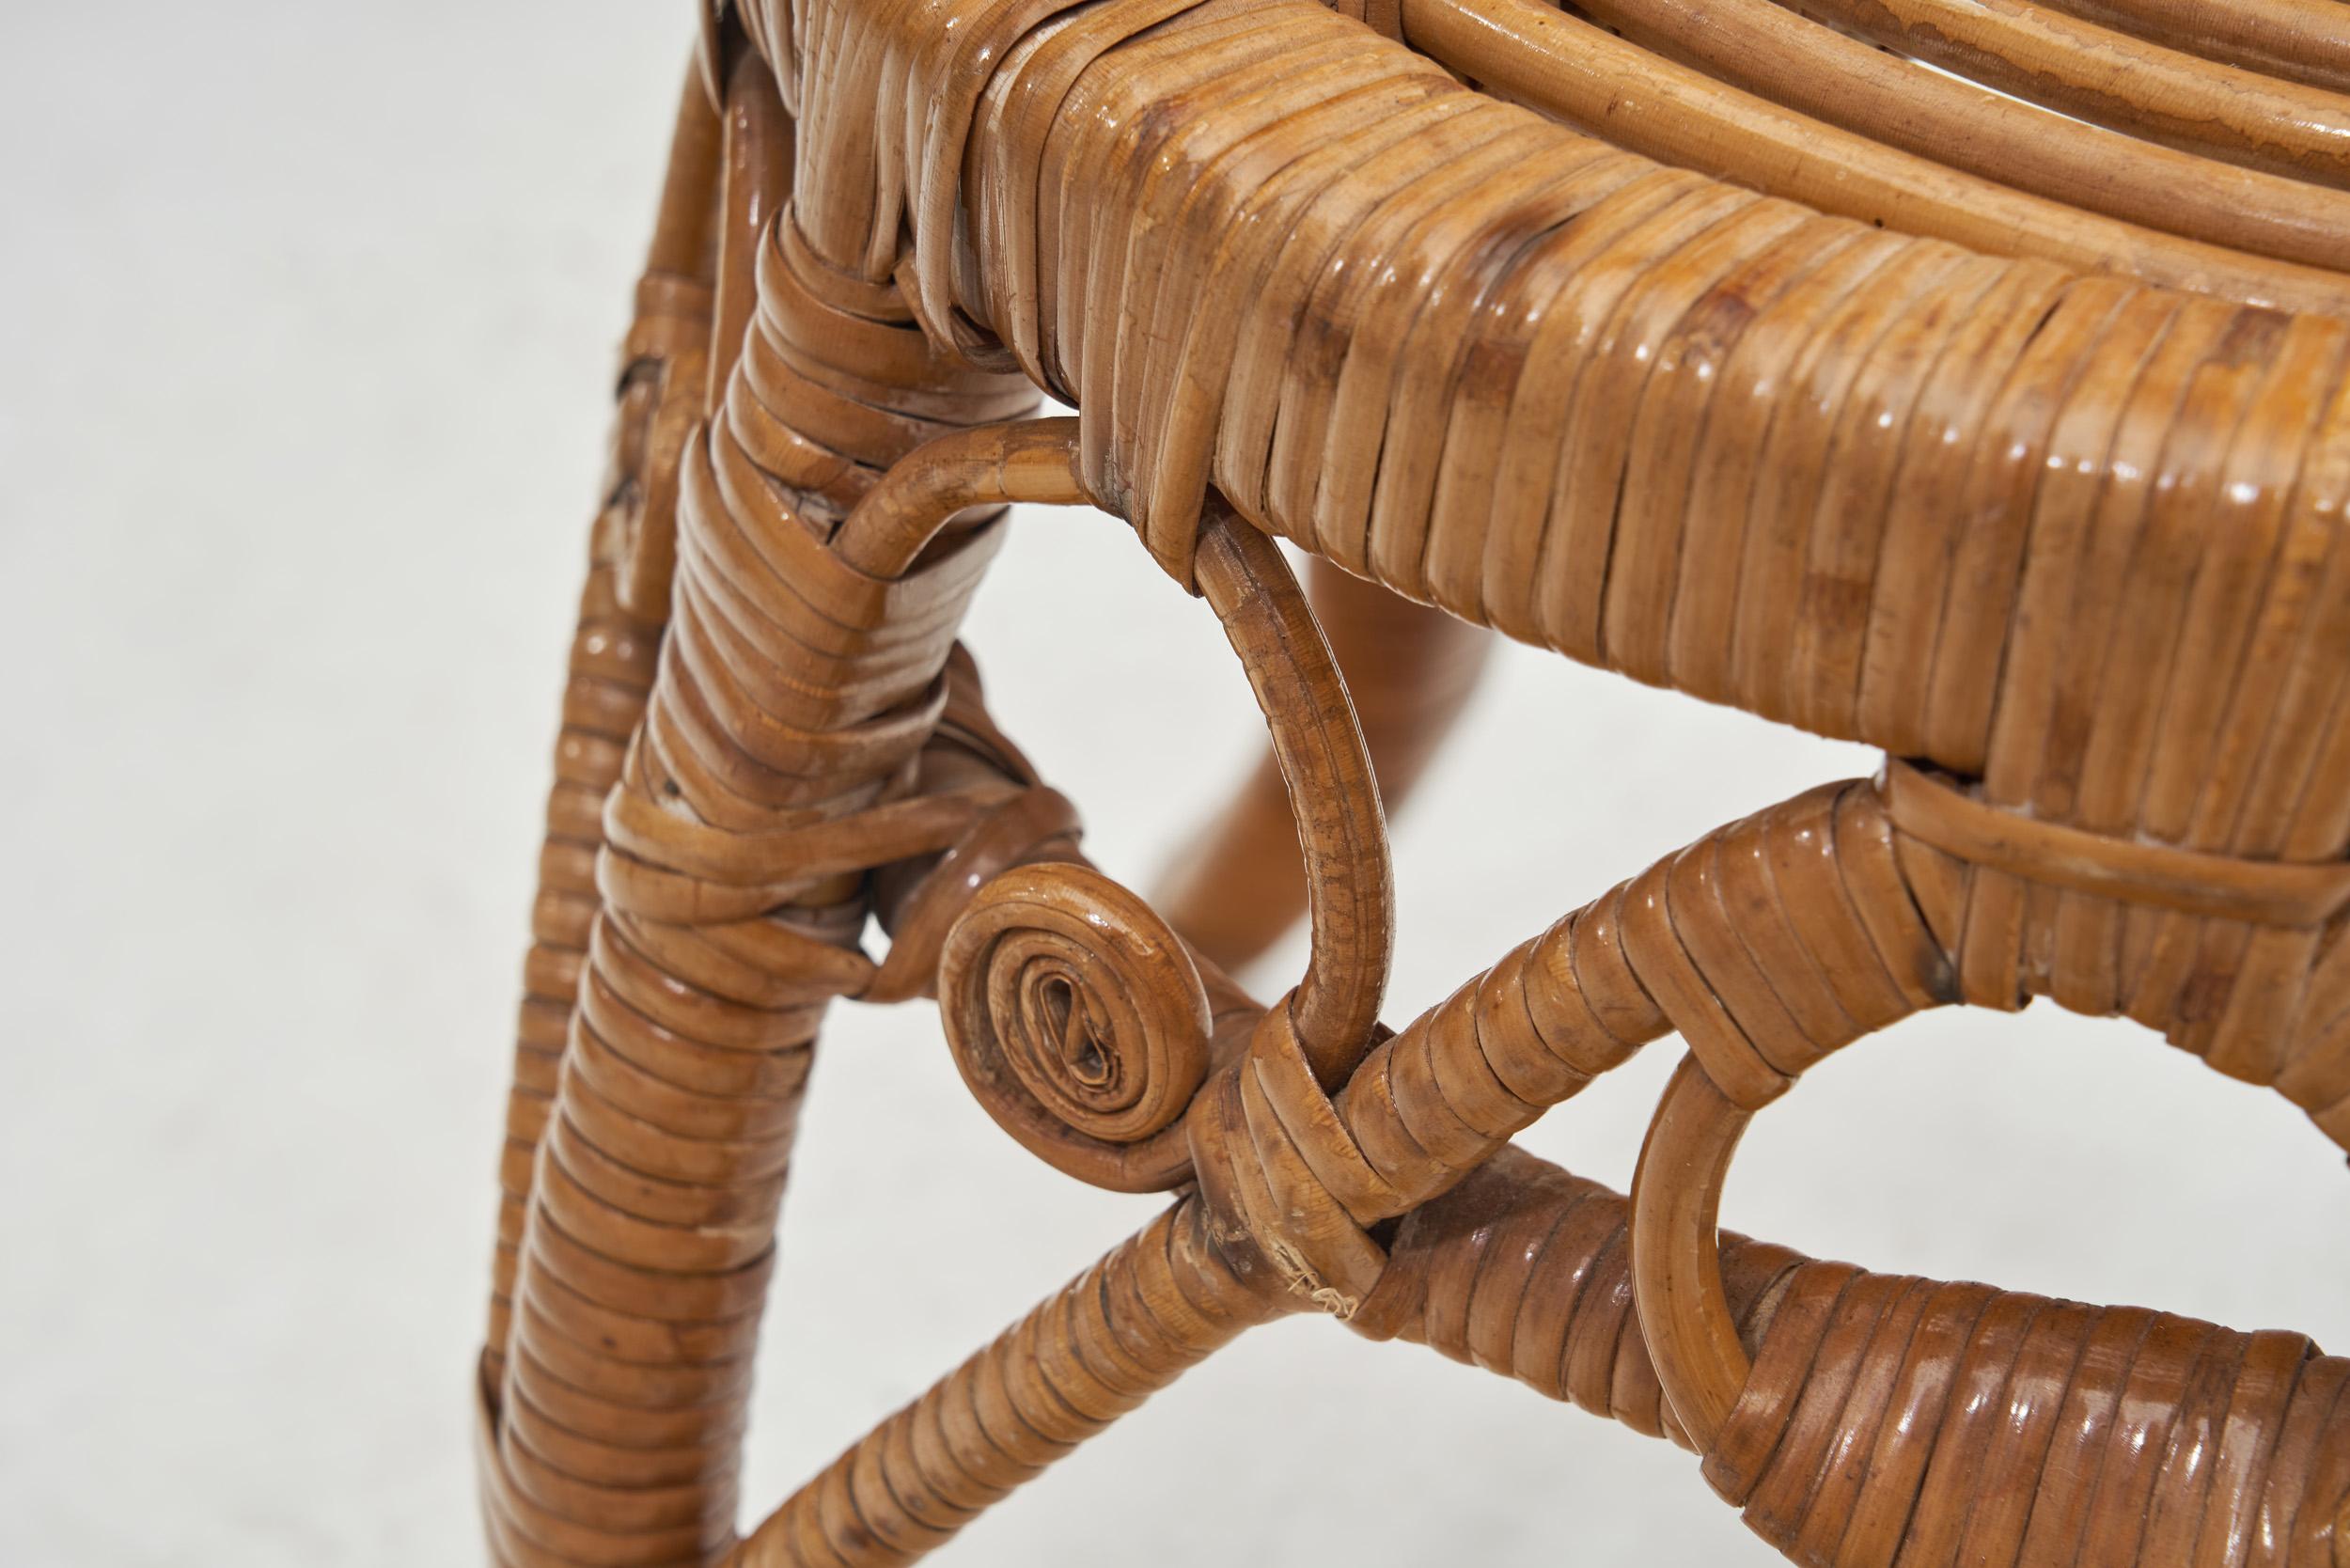 Woven Rattan Stool, Europe Early 20th Century For Sale 5